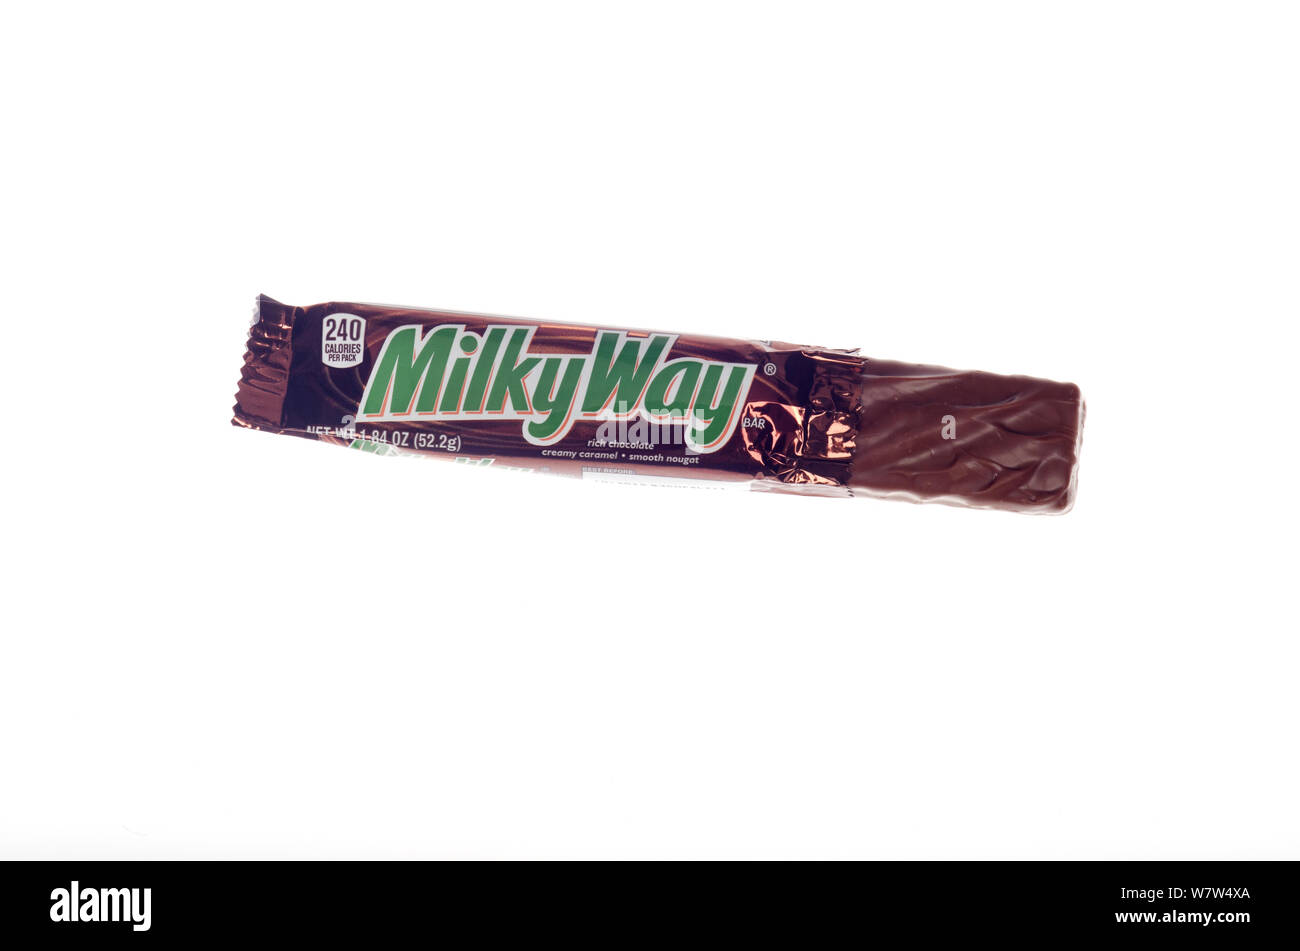 Milky Way candy bar with wrapper opened Stock Photo